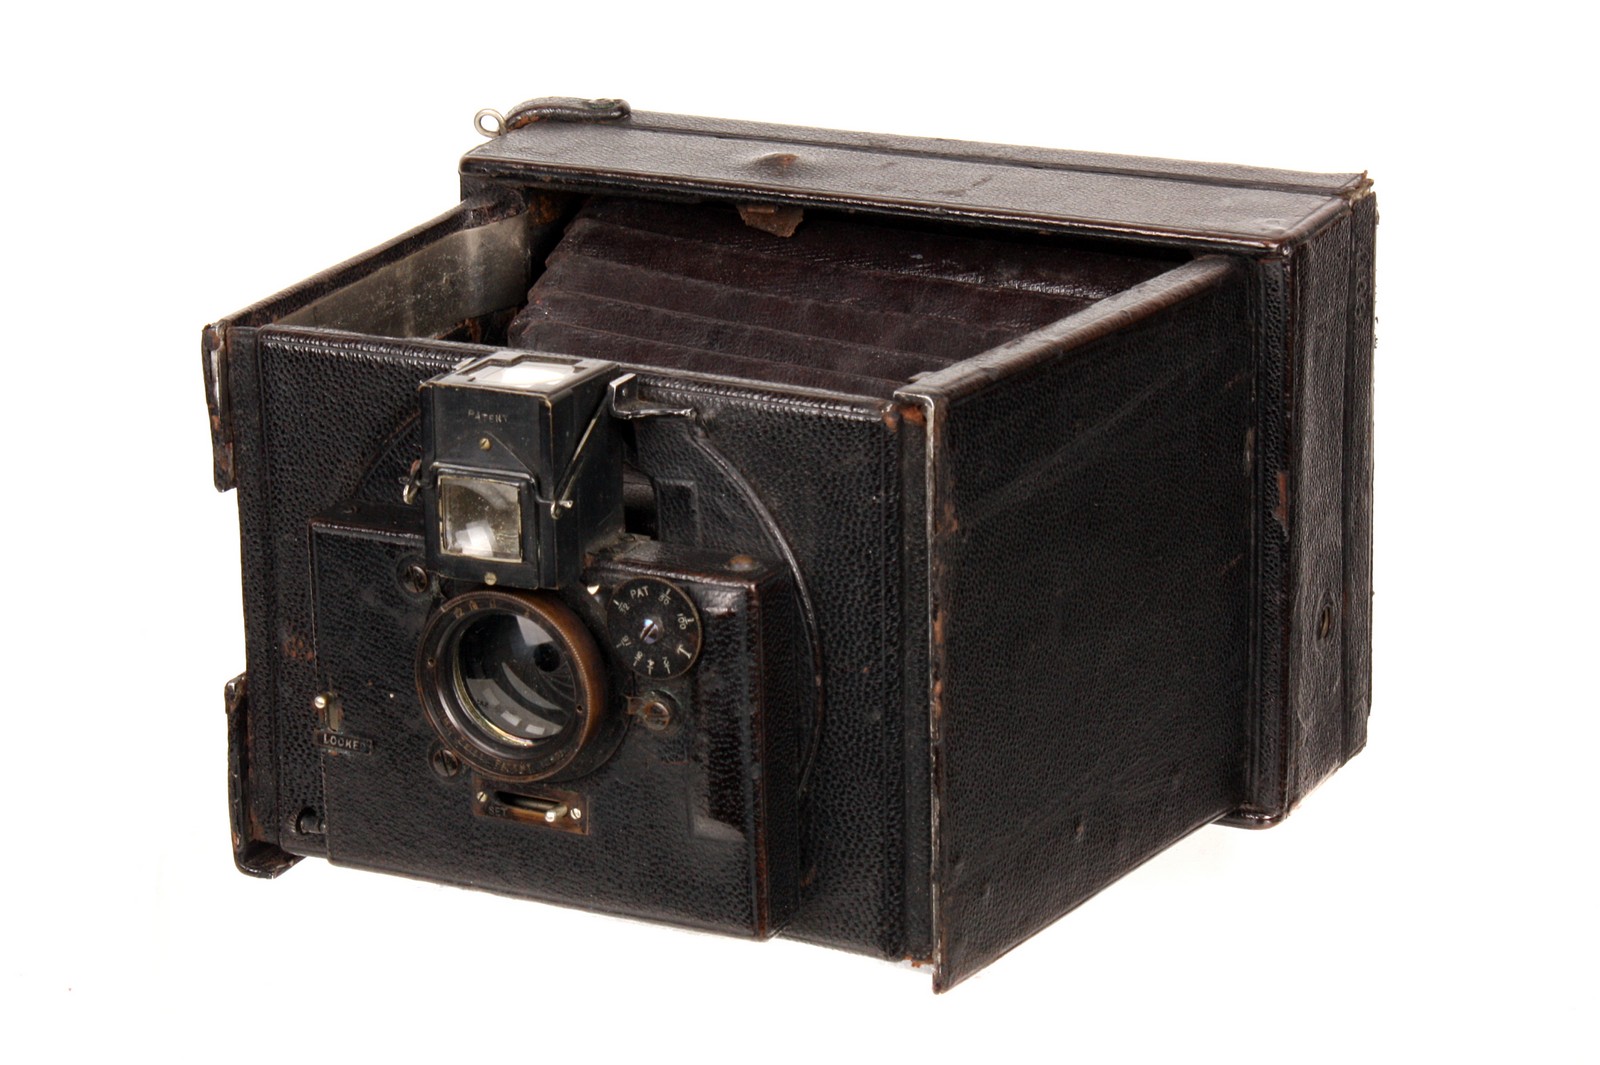 An Adams & Co. Idento Folding Strut Camera, serial no. 4109, 3¼x4½, with Ross Zeiss f/6.3 lens,